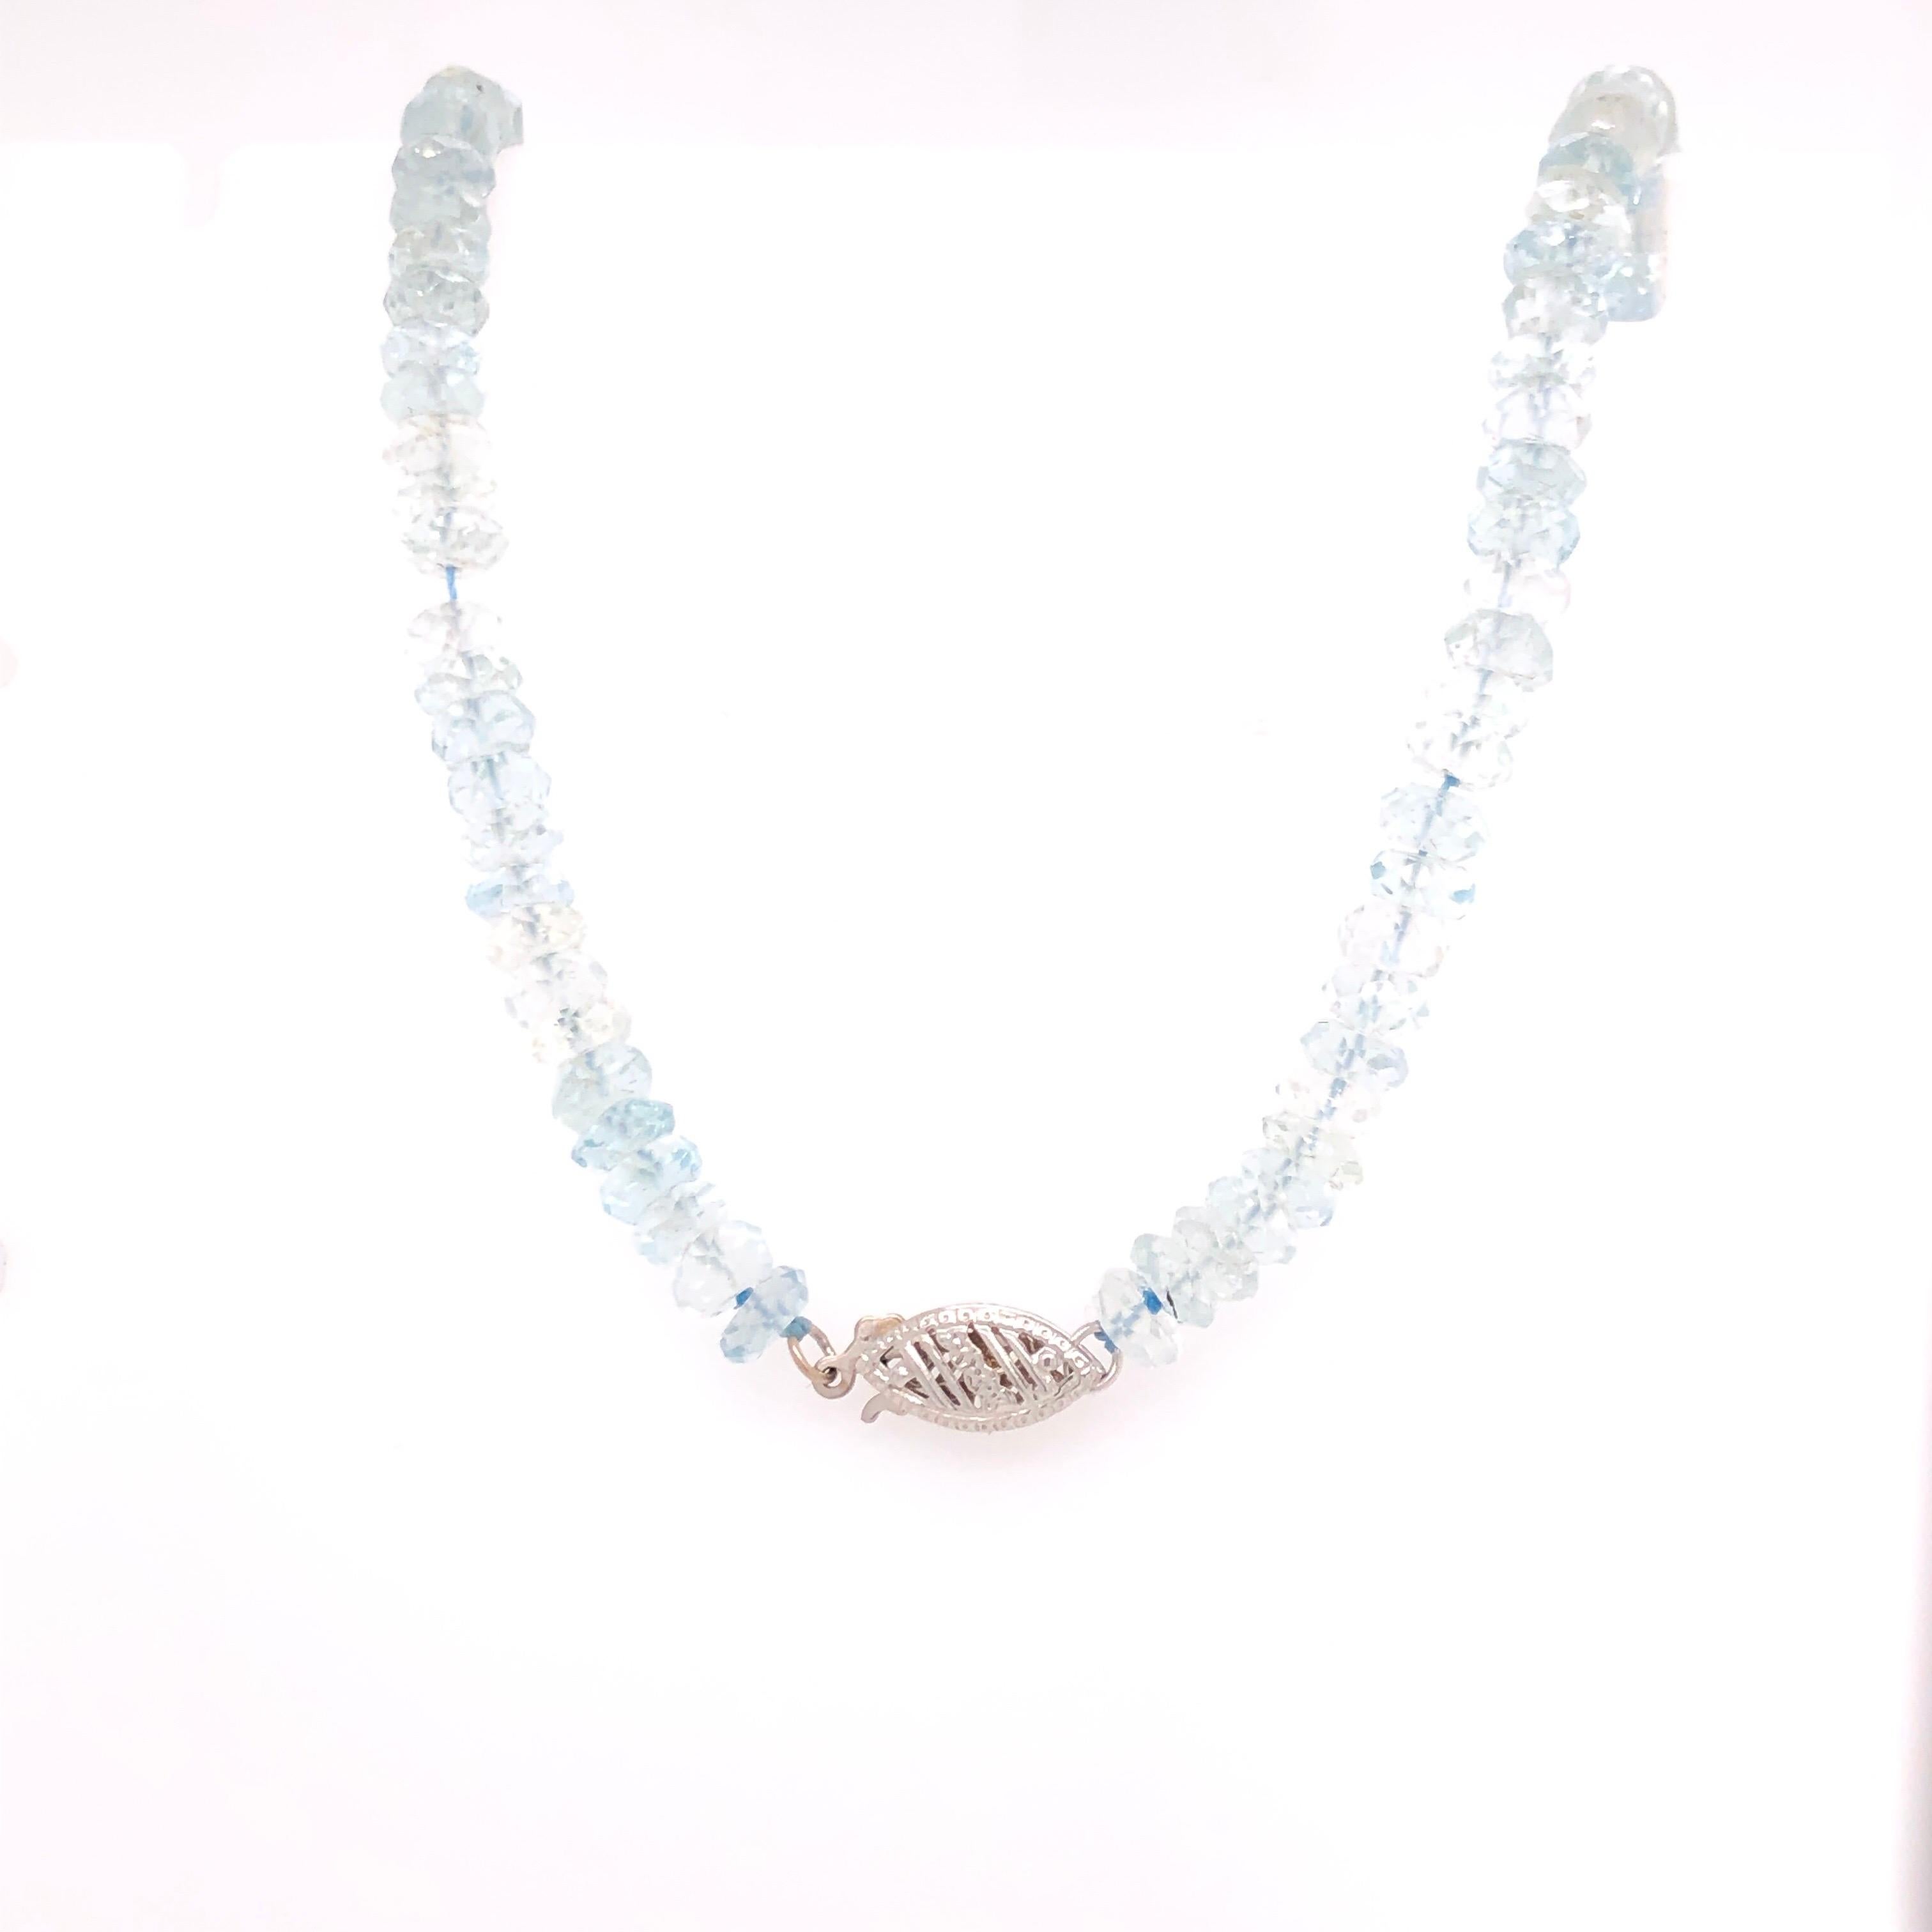 Like the color of the sky where it meets the horizon, the delicate color of this simple but elegant faceted aquamarine necklace is accented by 4 14K white gold diamond stations with an approximate total weight of 0.1 CTs of melee diamonds. 

This